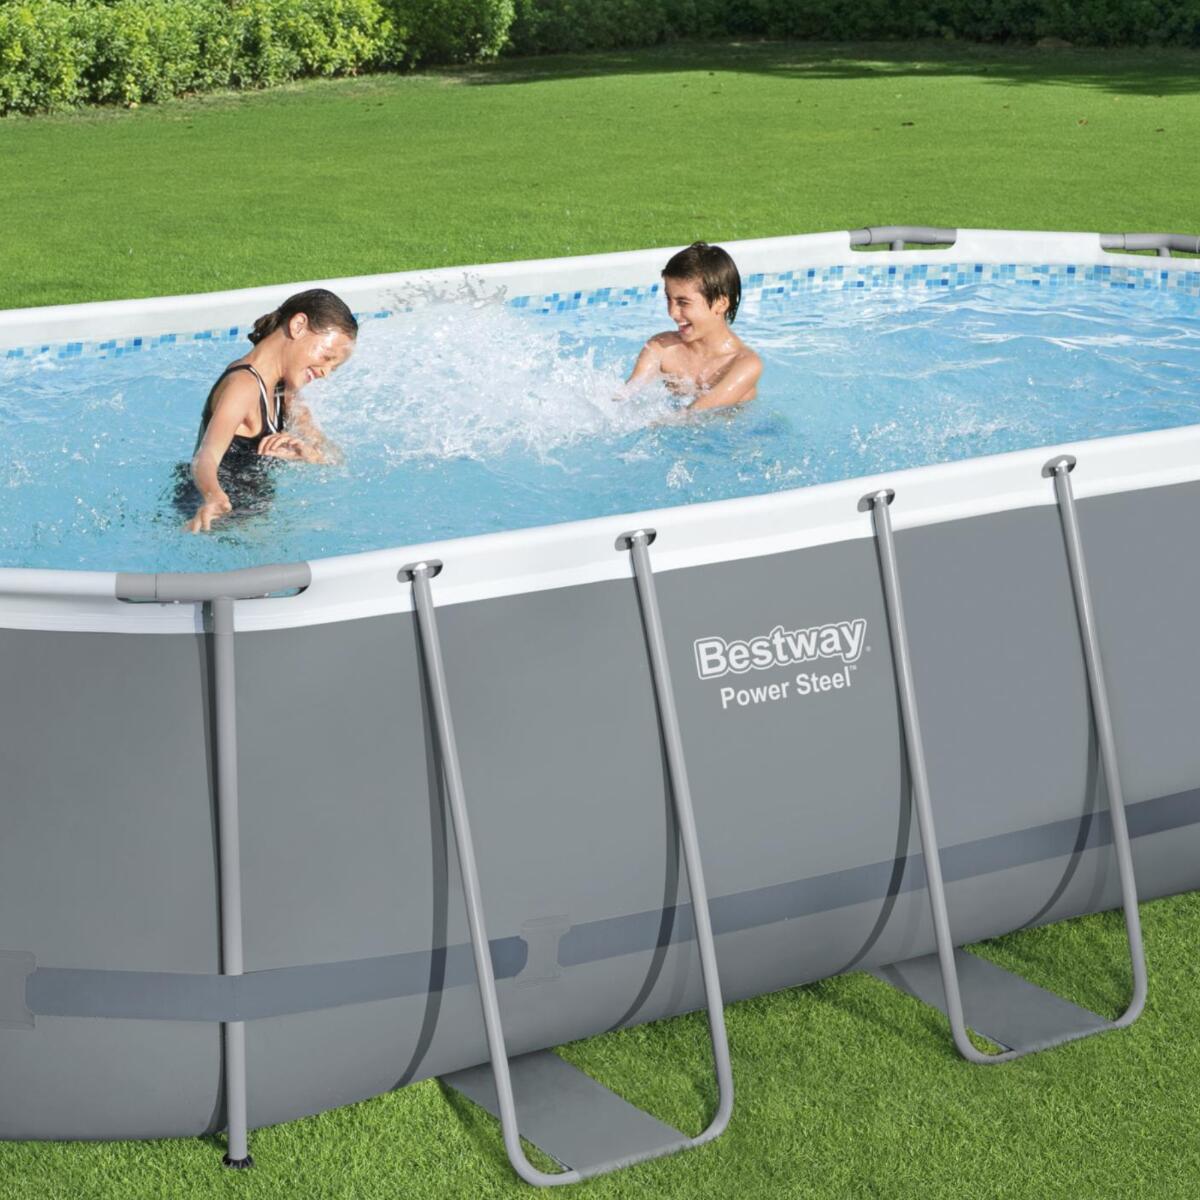 Bestway 18ft x 9ft x 48" Oval Power Steel Above Ground Swimming Pool 2/6